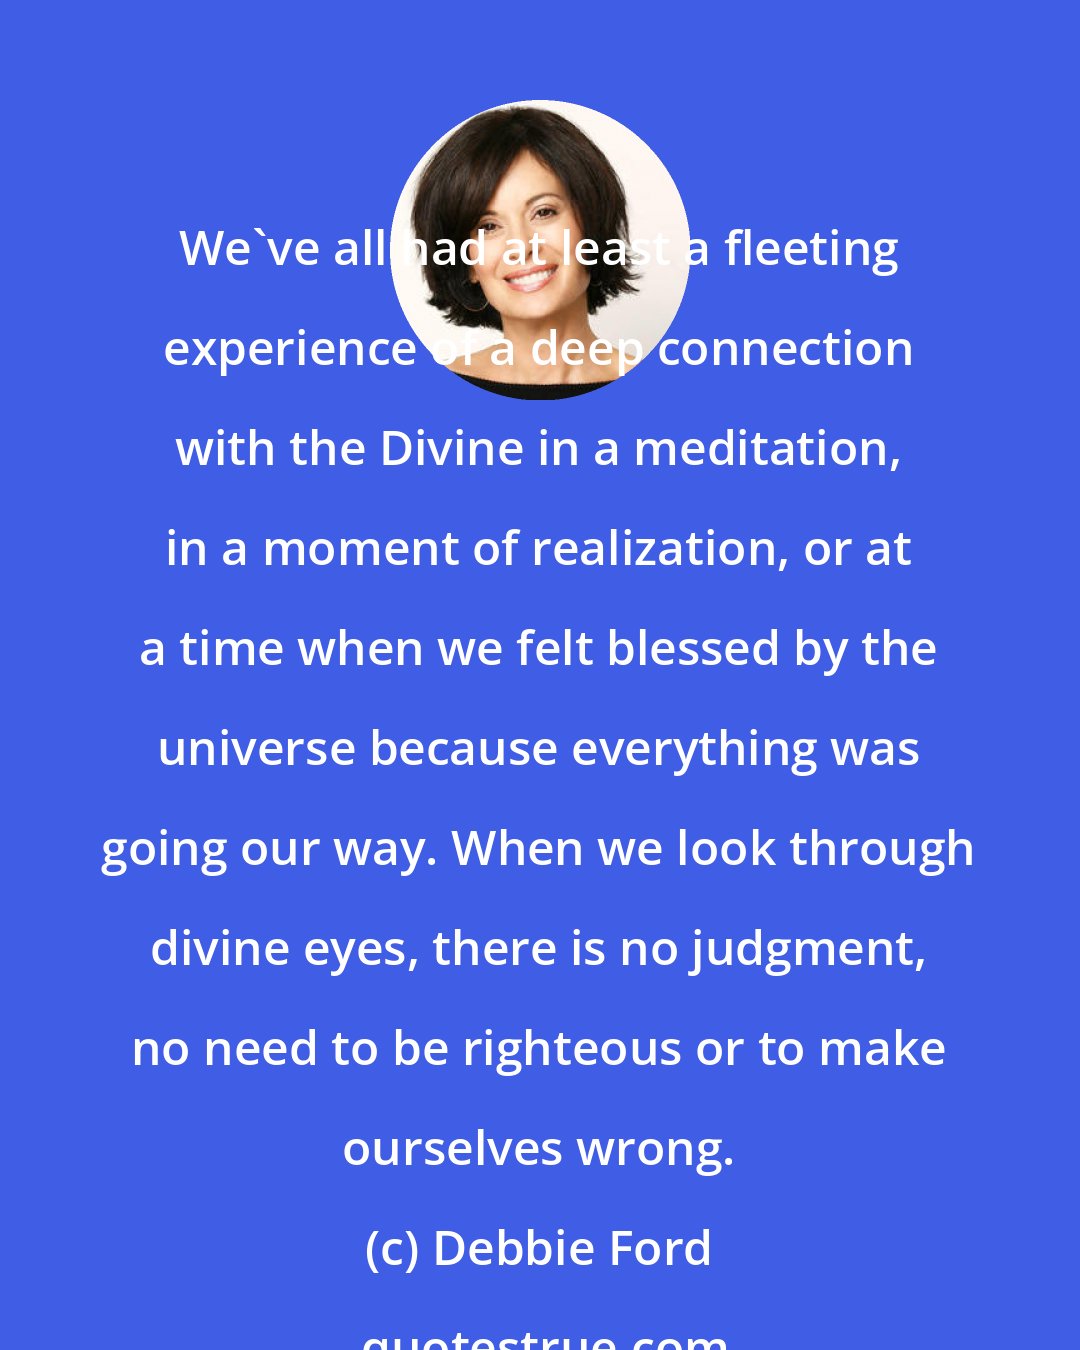 Debbie Ford: We've all had at least a fleeting experience of a deep connection with the Divine in a meditation, in a moment of realization, or at a time when we felt blessed by the universe because everything was going our way. When we look through divine eyes, there is no judgment, no need to be righteous or to make ourselves wrong.